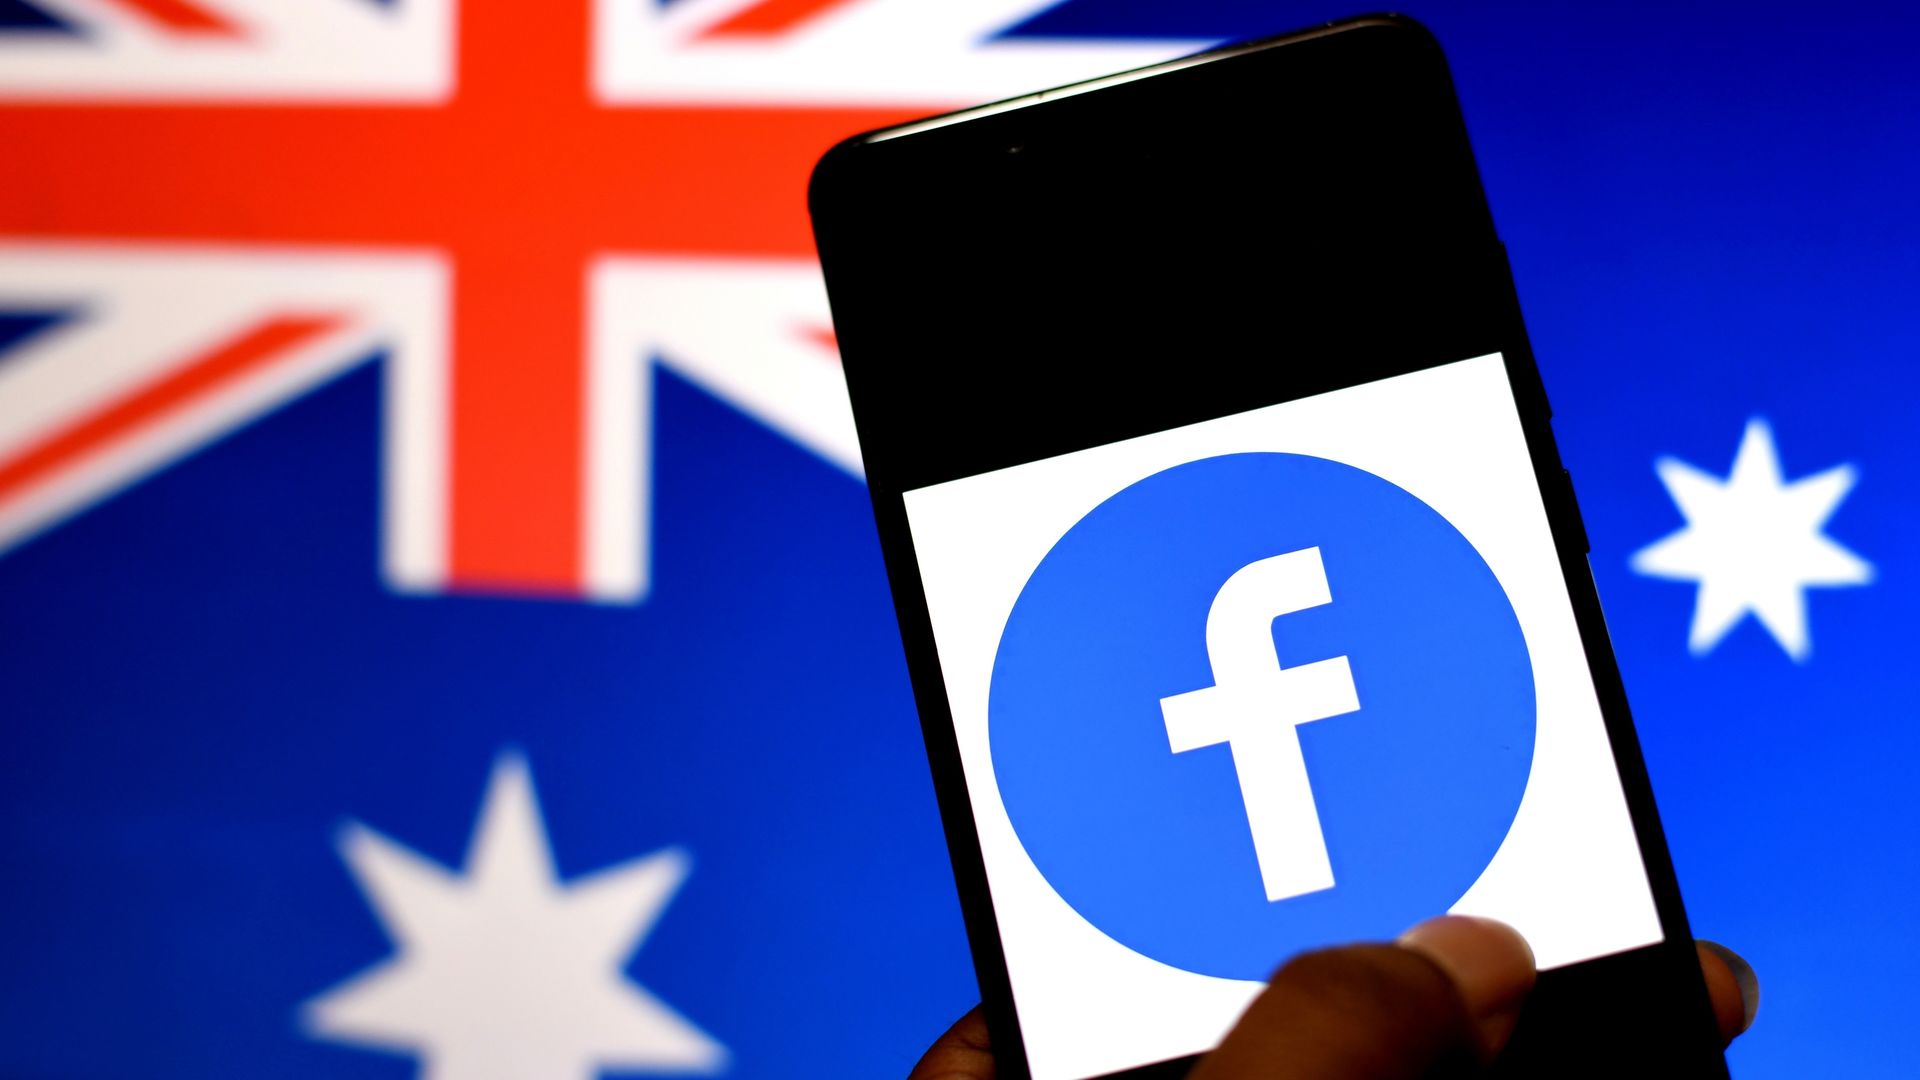 An image of a phone with the Facebook app against the Australian flag